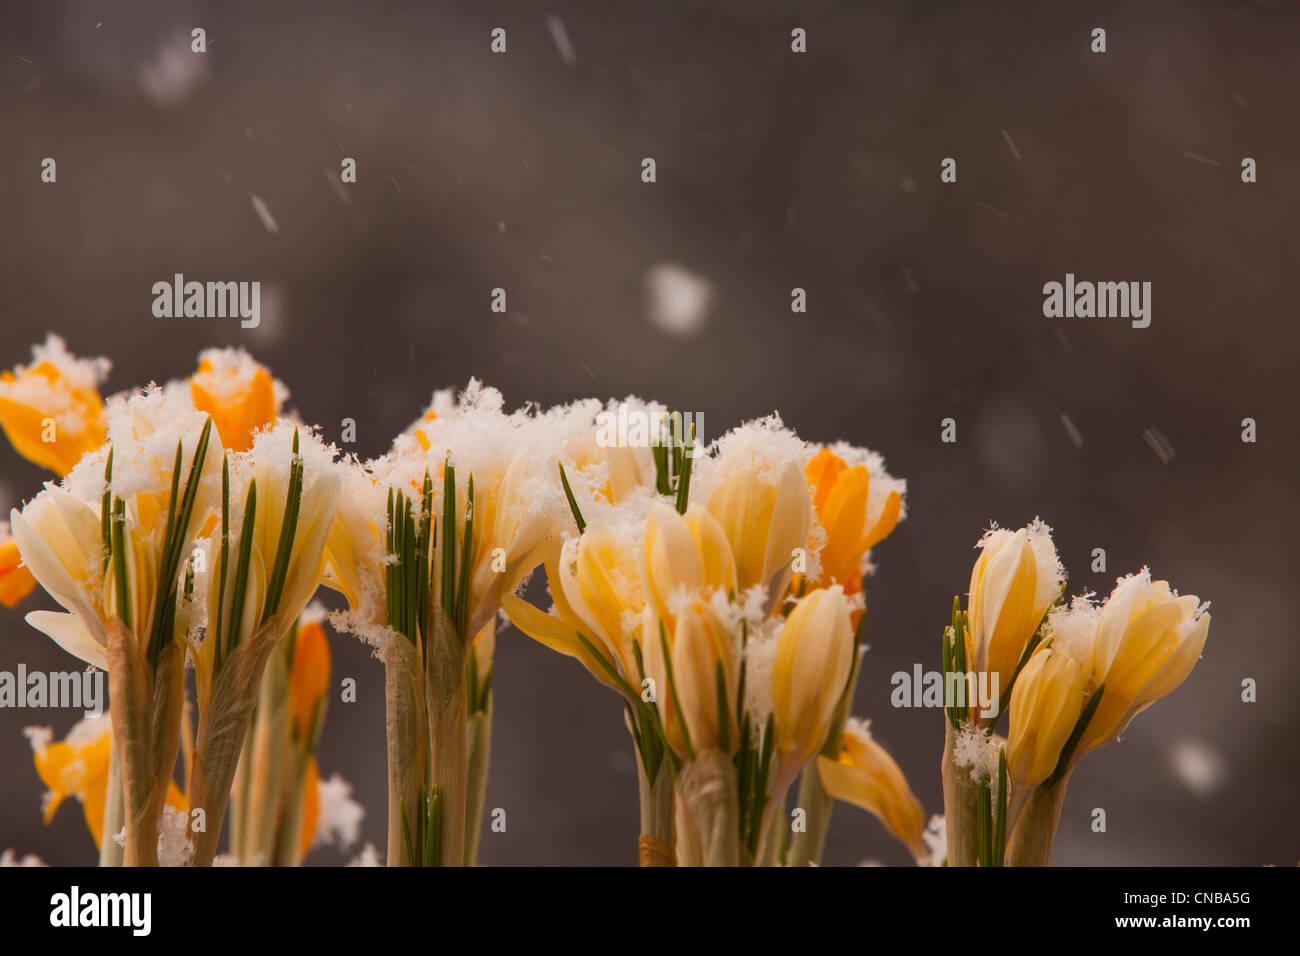 Close up of white and yellow crocus flowers growing outside in falling snow, Kodiak, Southwest Alaska, Winter Stock Photo